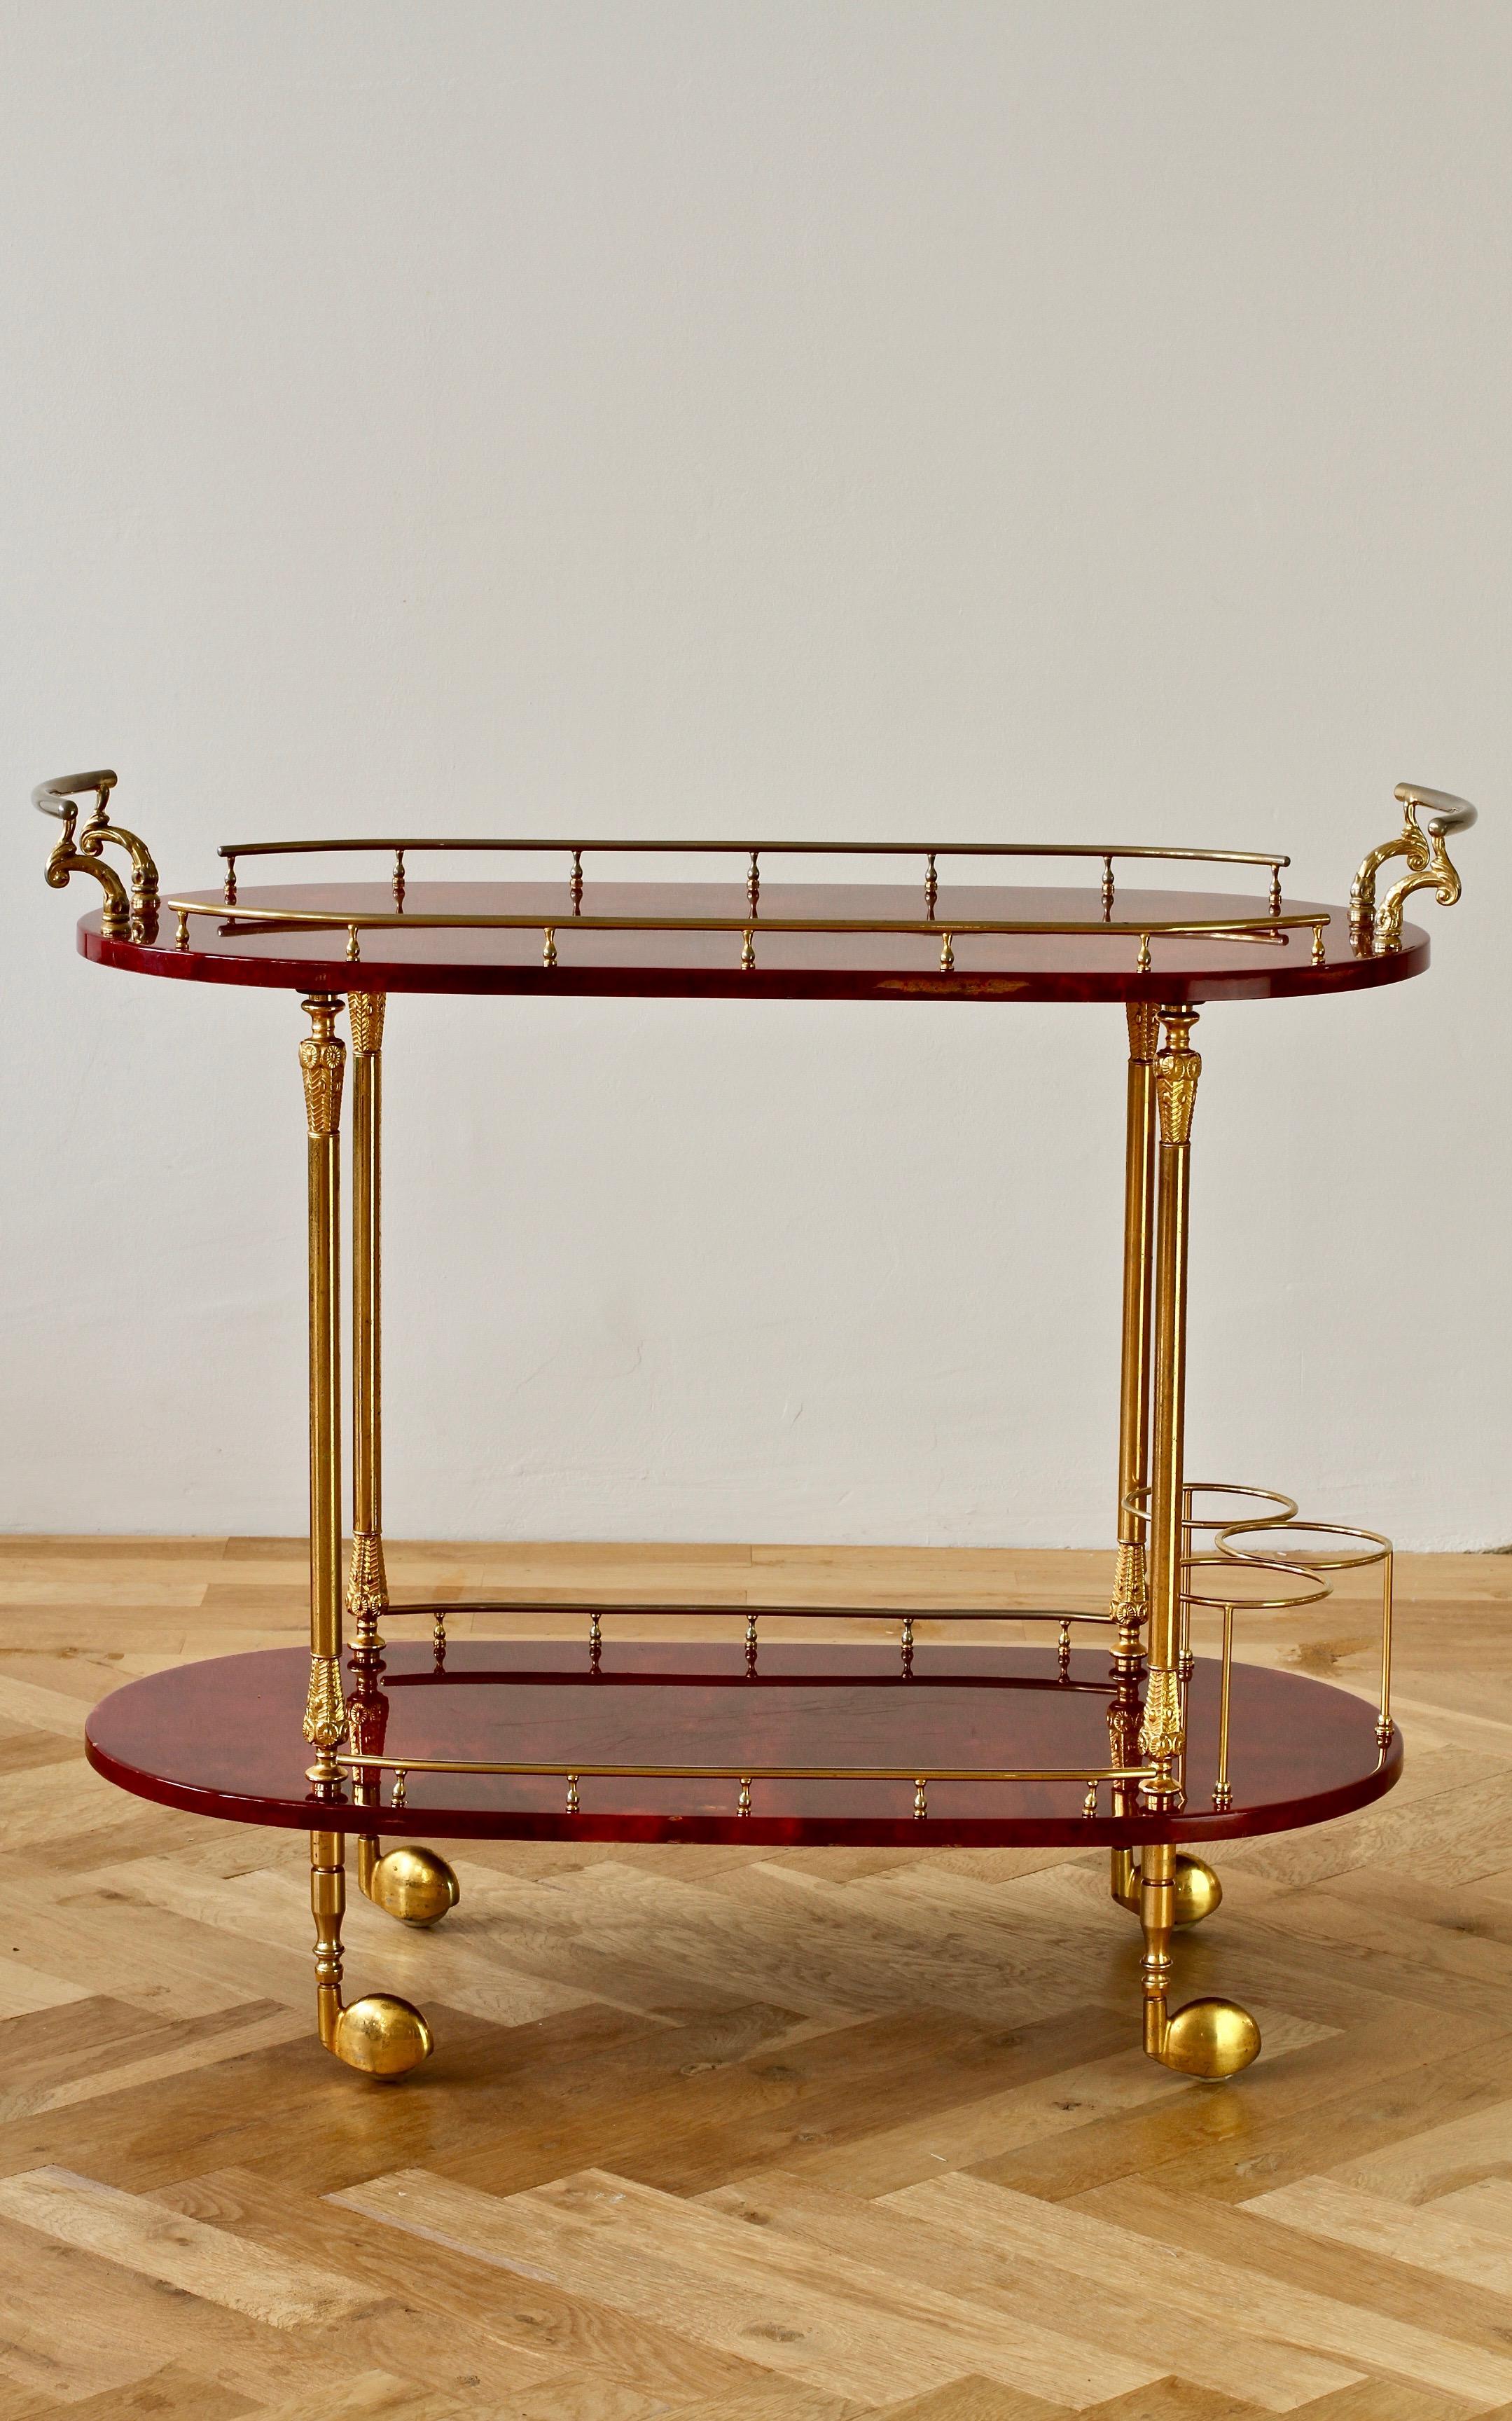 Mid-20th Century Aldo Tura 1950s Midcentury Bar Cart, Trolley or Stand in Red Italian Goatskin